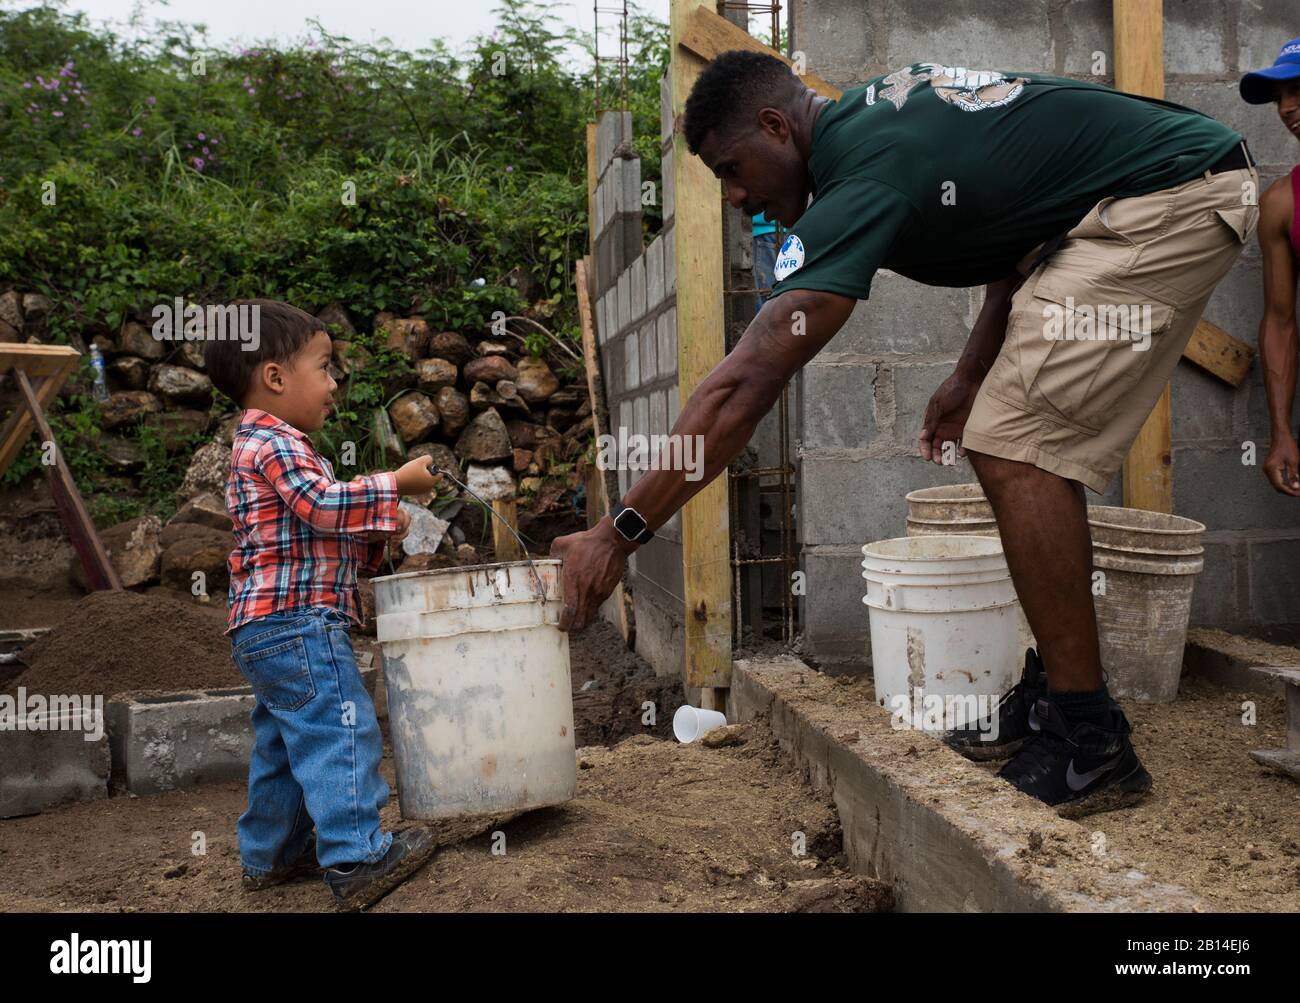 U.S. Marine Corps Sgt. Antoine D. Coleman, the armory chief with the Command Element, Special Purpose Marine Air-Ground Task Force - Southern Command, helps a child carry a bucket of gravel during a community relations event in La Paz, Honduras, Oct. 25, 2017. Partnered with Habitat for Humanity, the Marines worked to build the foundation of a house for a local family. The Marines and sailors of SPMAGTF-SC are deployed to Central America to conduct security cooperation training and engineering projects with their counterparts in several Central American and Caribbean nations. (U.S. Marine Corp Stock Photo